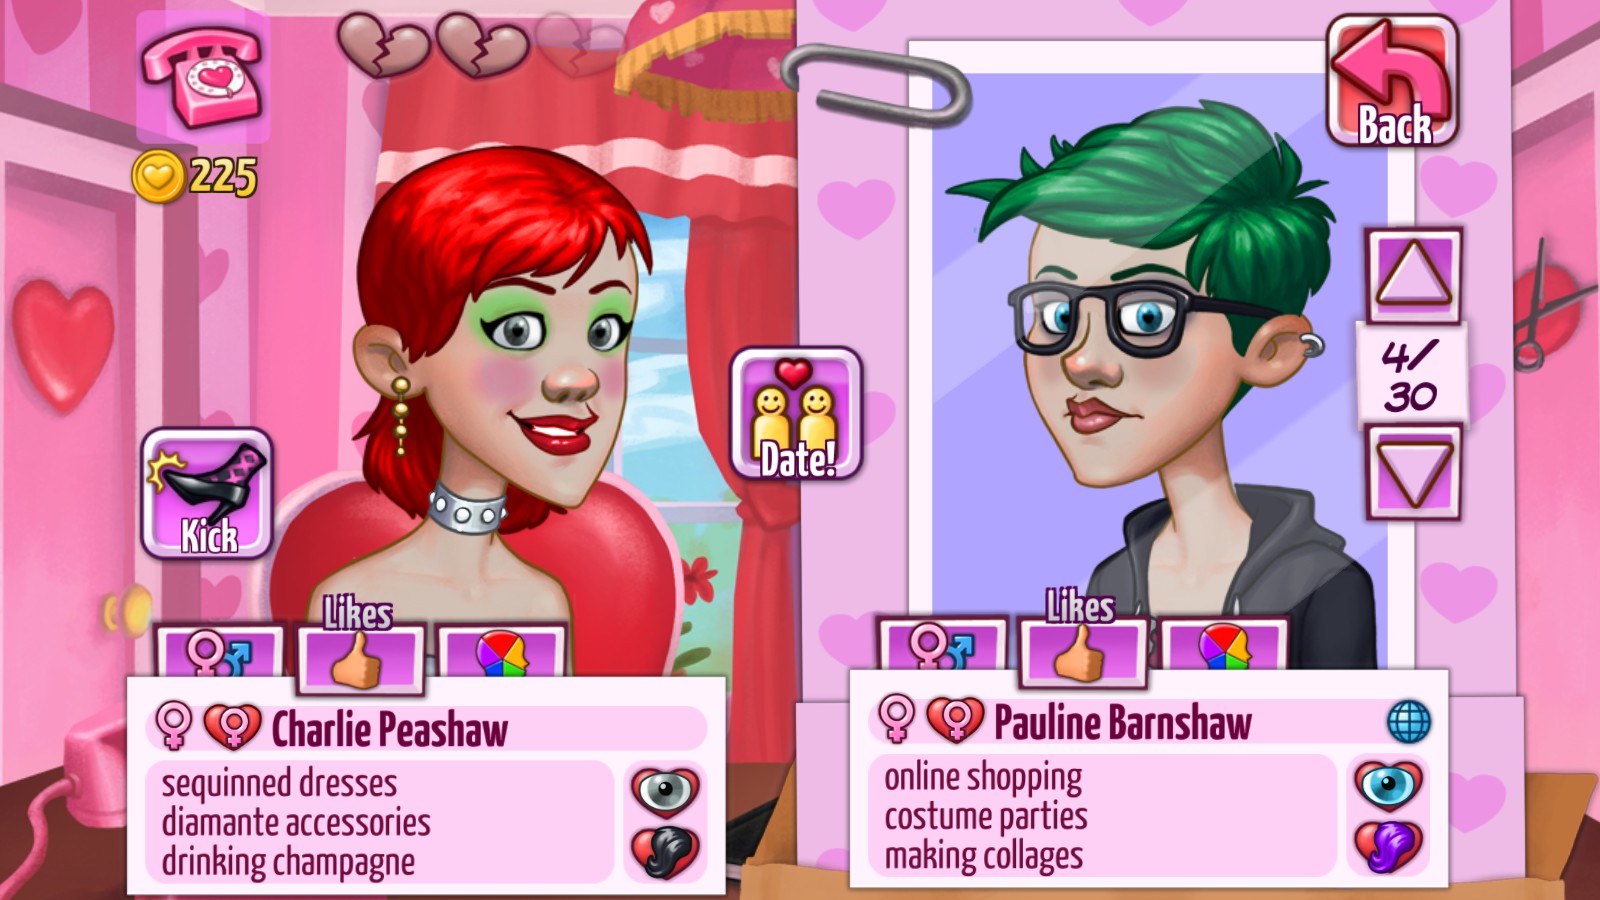 kitty powers matchmaker free download mac